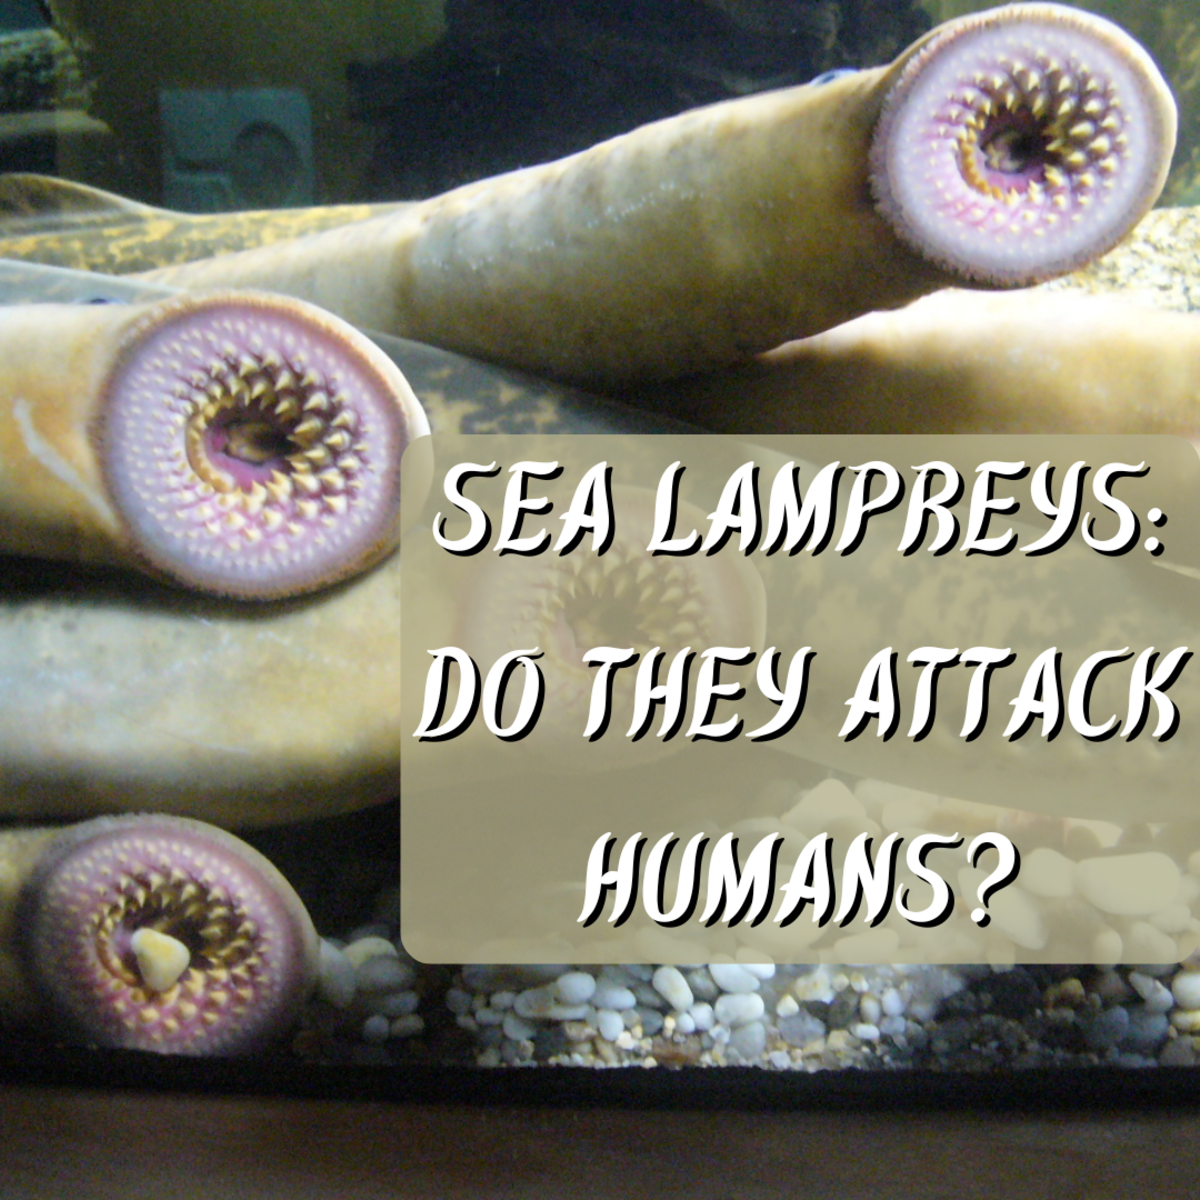 Do lampreys attack humans? Read on to find out this and much more about the lamprey, a strange and frightening "living fossil." 